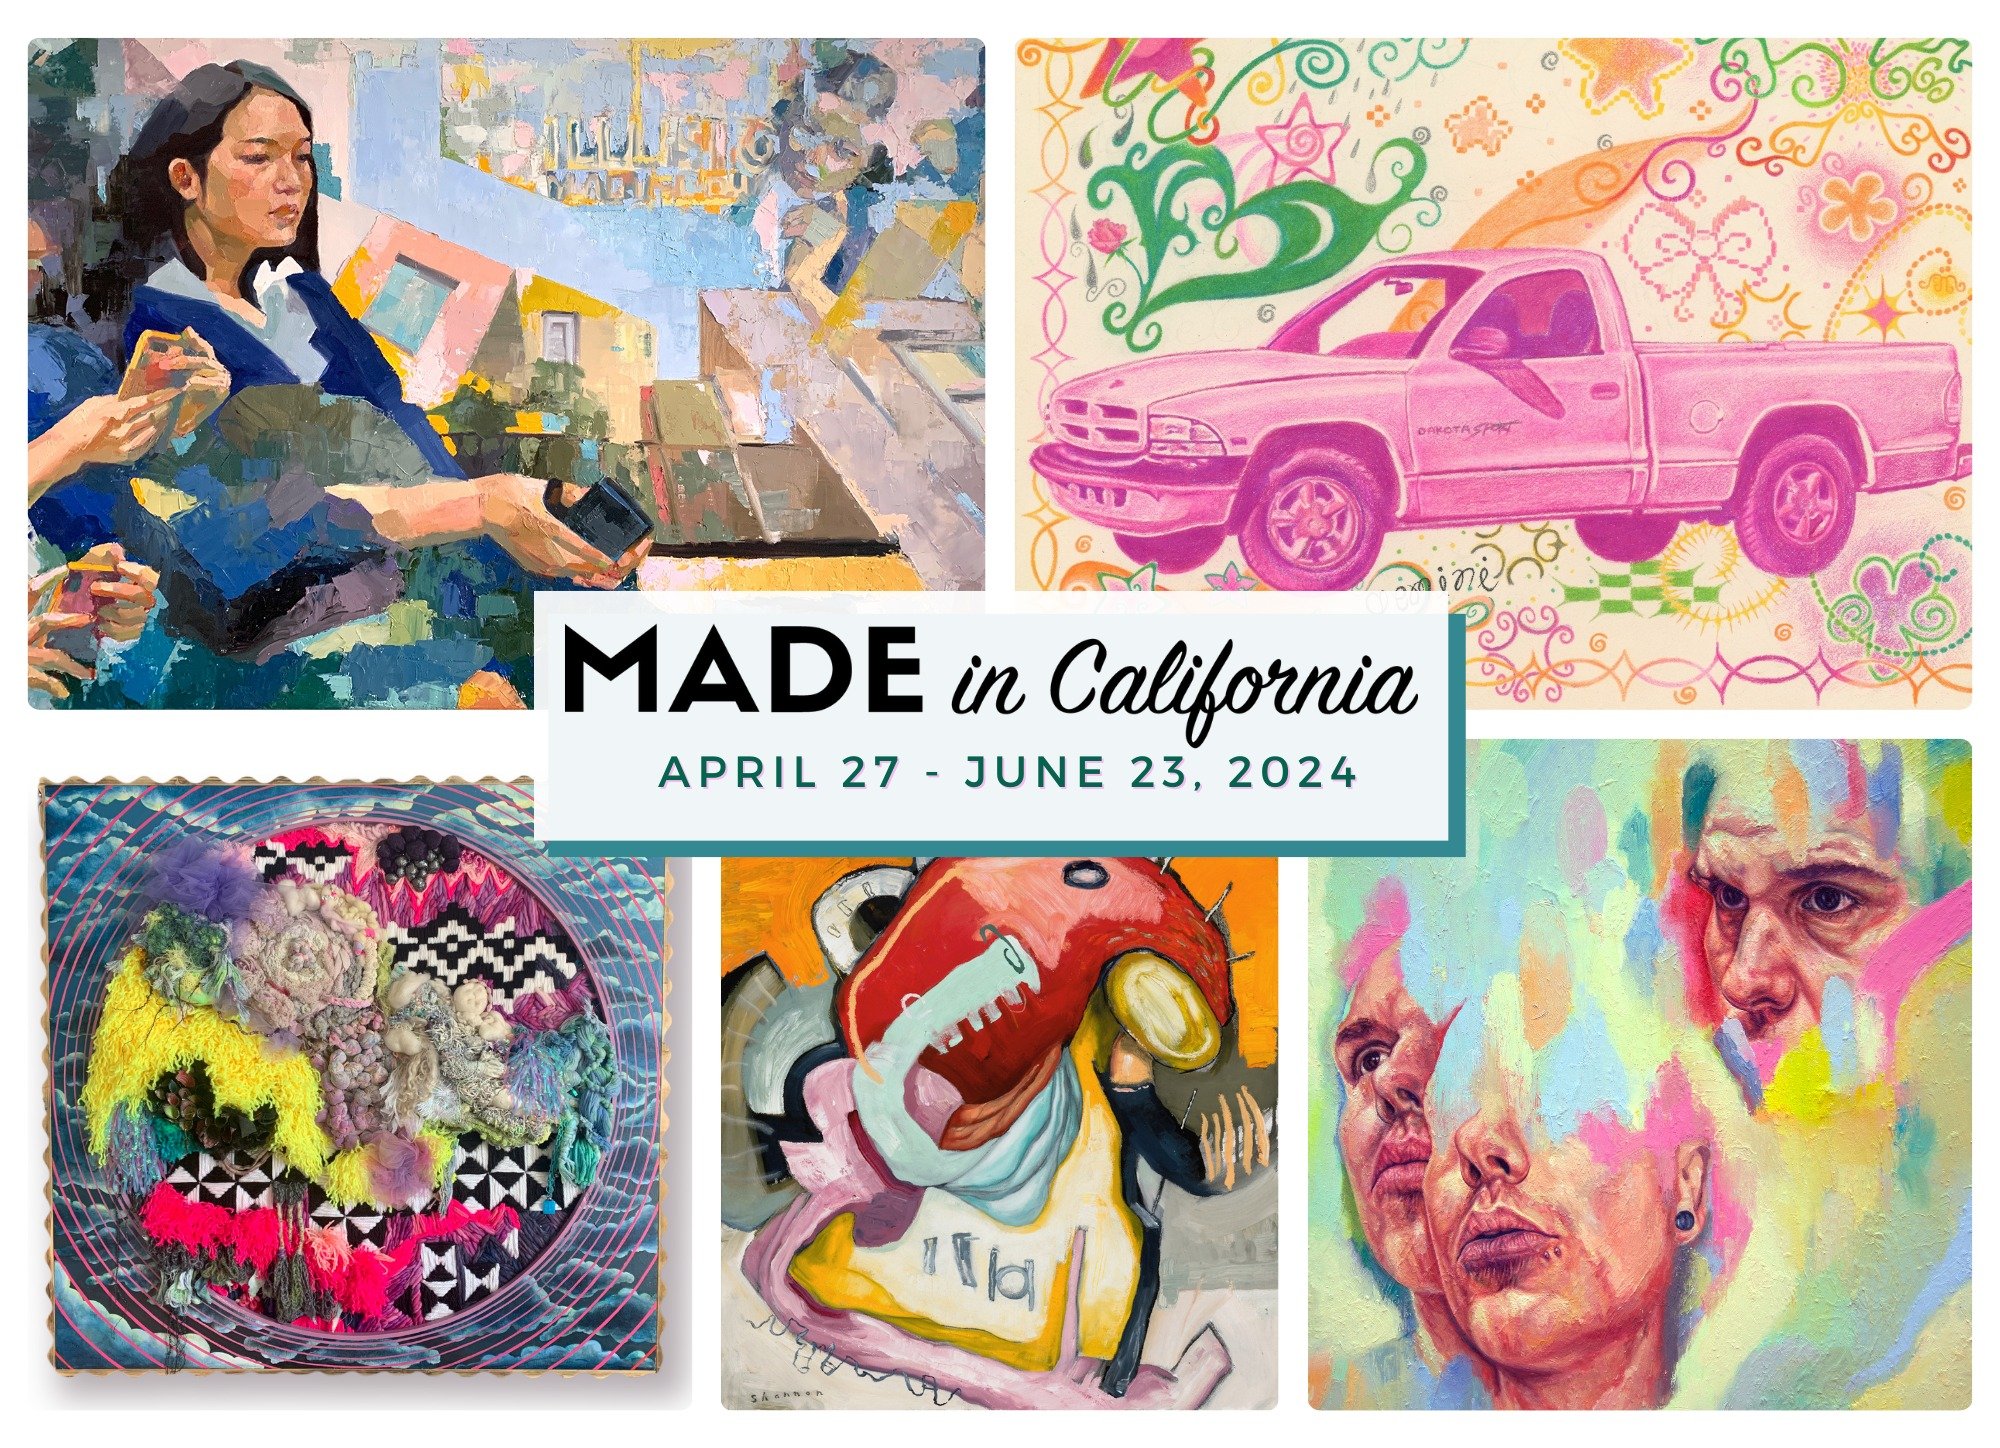 Save the date! Our 39th Annual #MadeinCalifornia group &amp; solo exhibition opens April 27th, 2024 🌈✨

This regional show features artwork from an extensive variety of mediums and explores creative movements happening in California. 🌴 With over 10